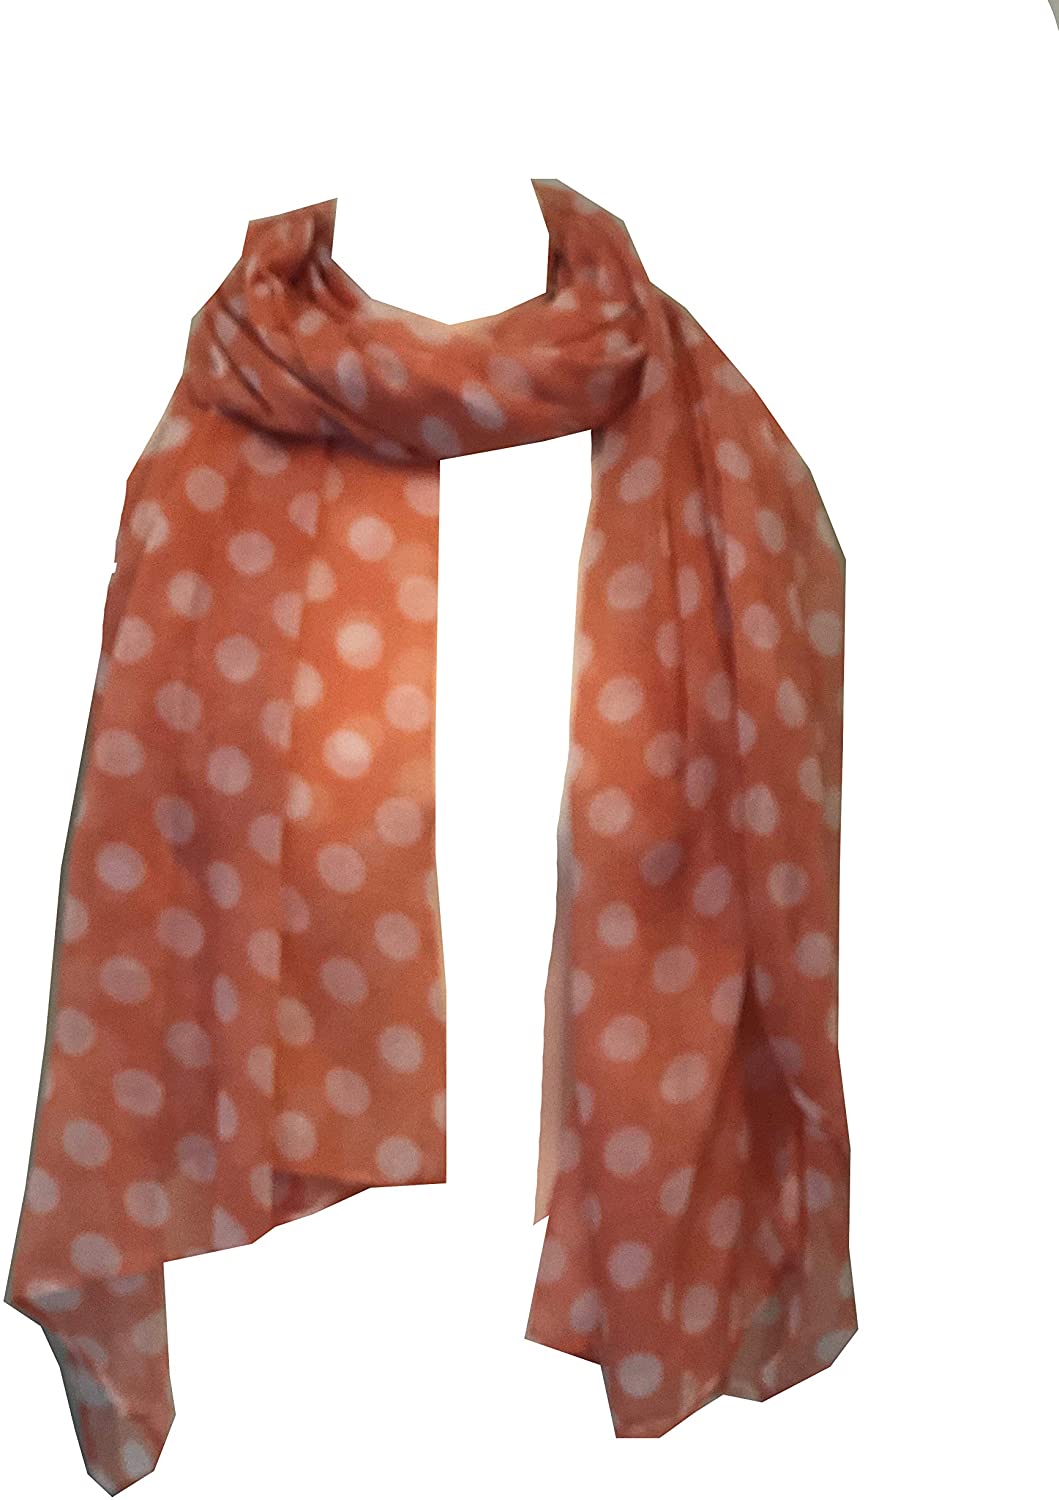 Pamper Yourself Now Peach with White Big spot Scarf/wrap